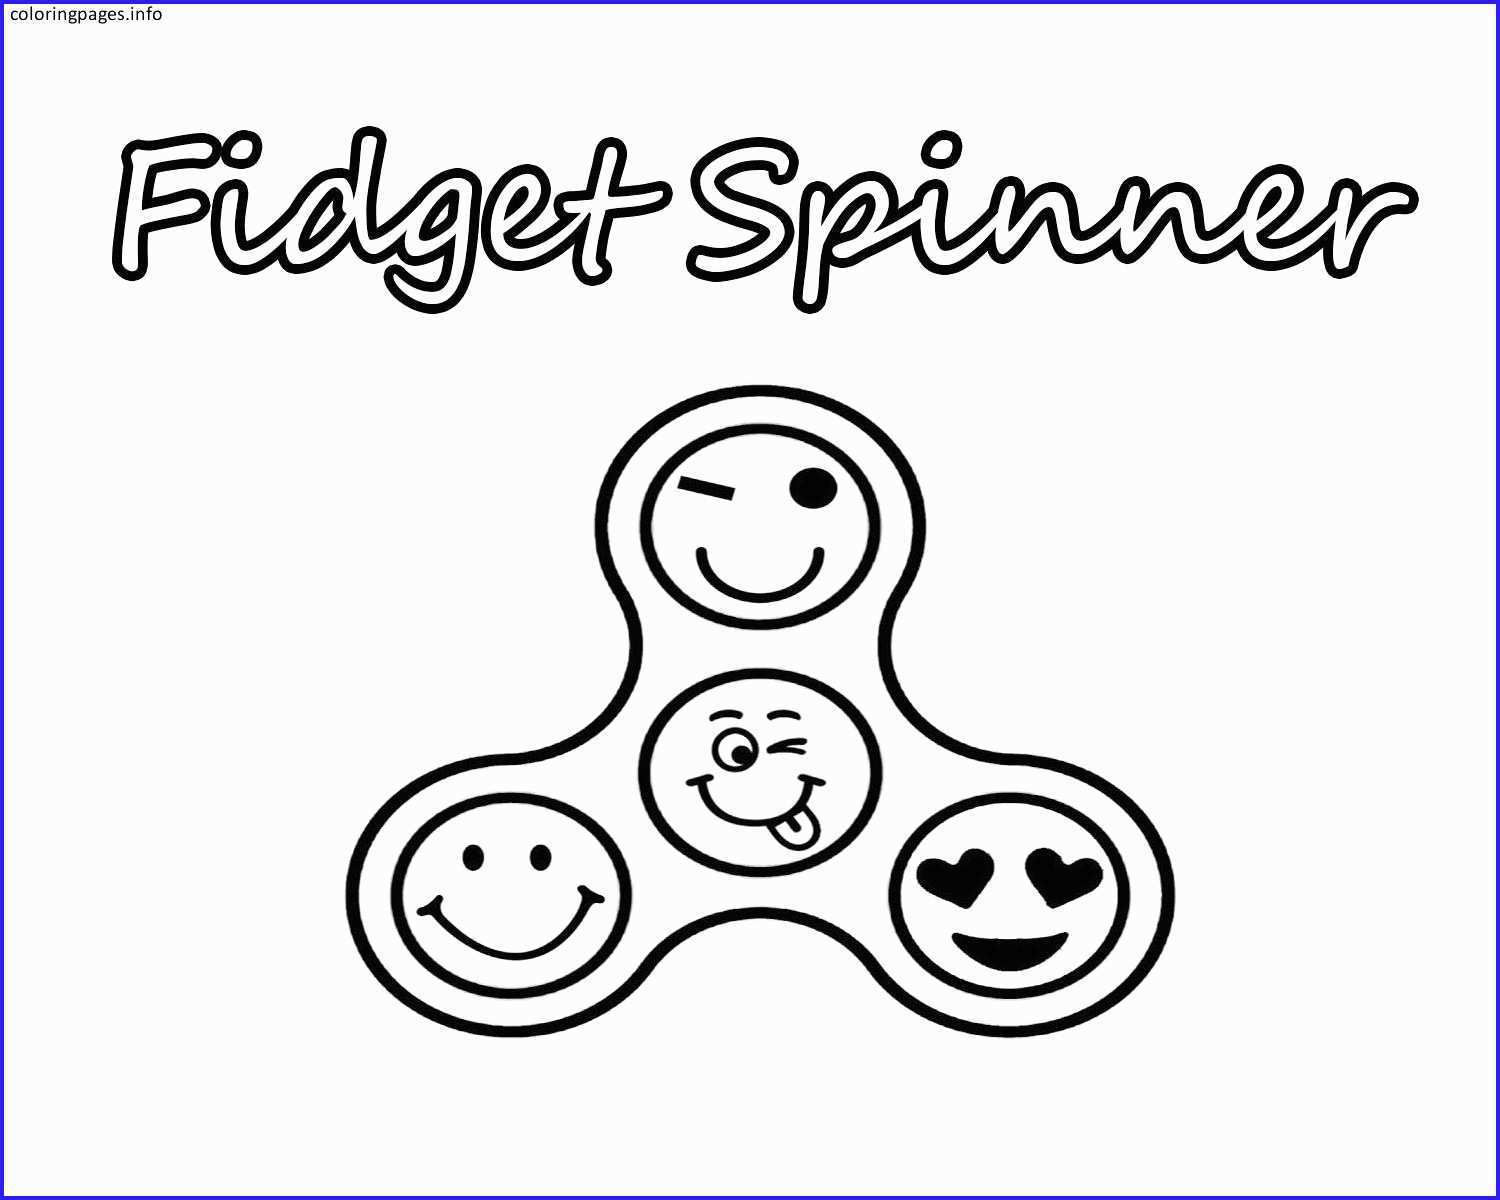 Coloring Pages Of Fidget Spinners Fidget Spinner Coloring Pages Fidget Spinner Coloring Pages To Print